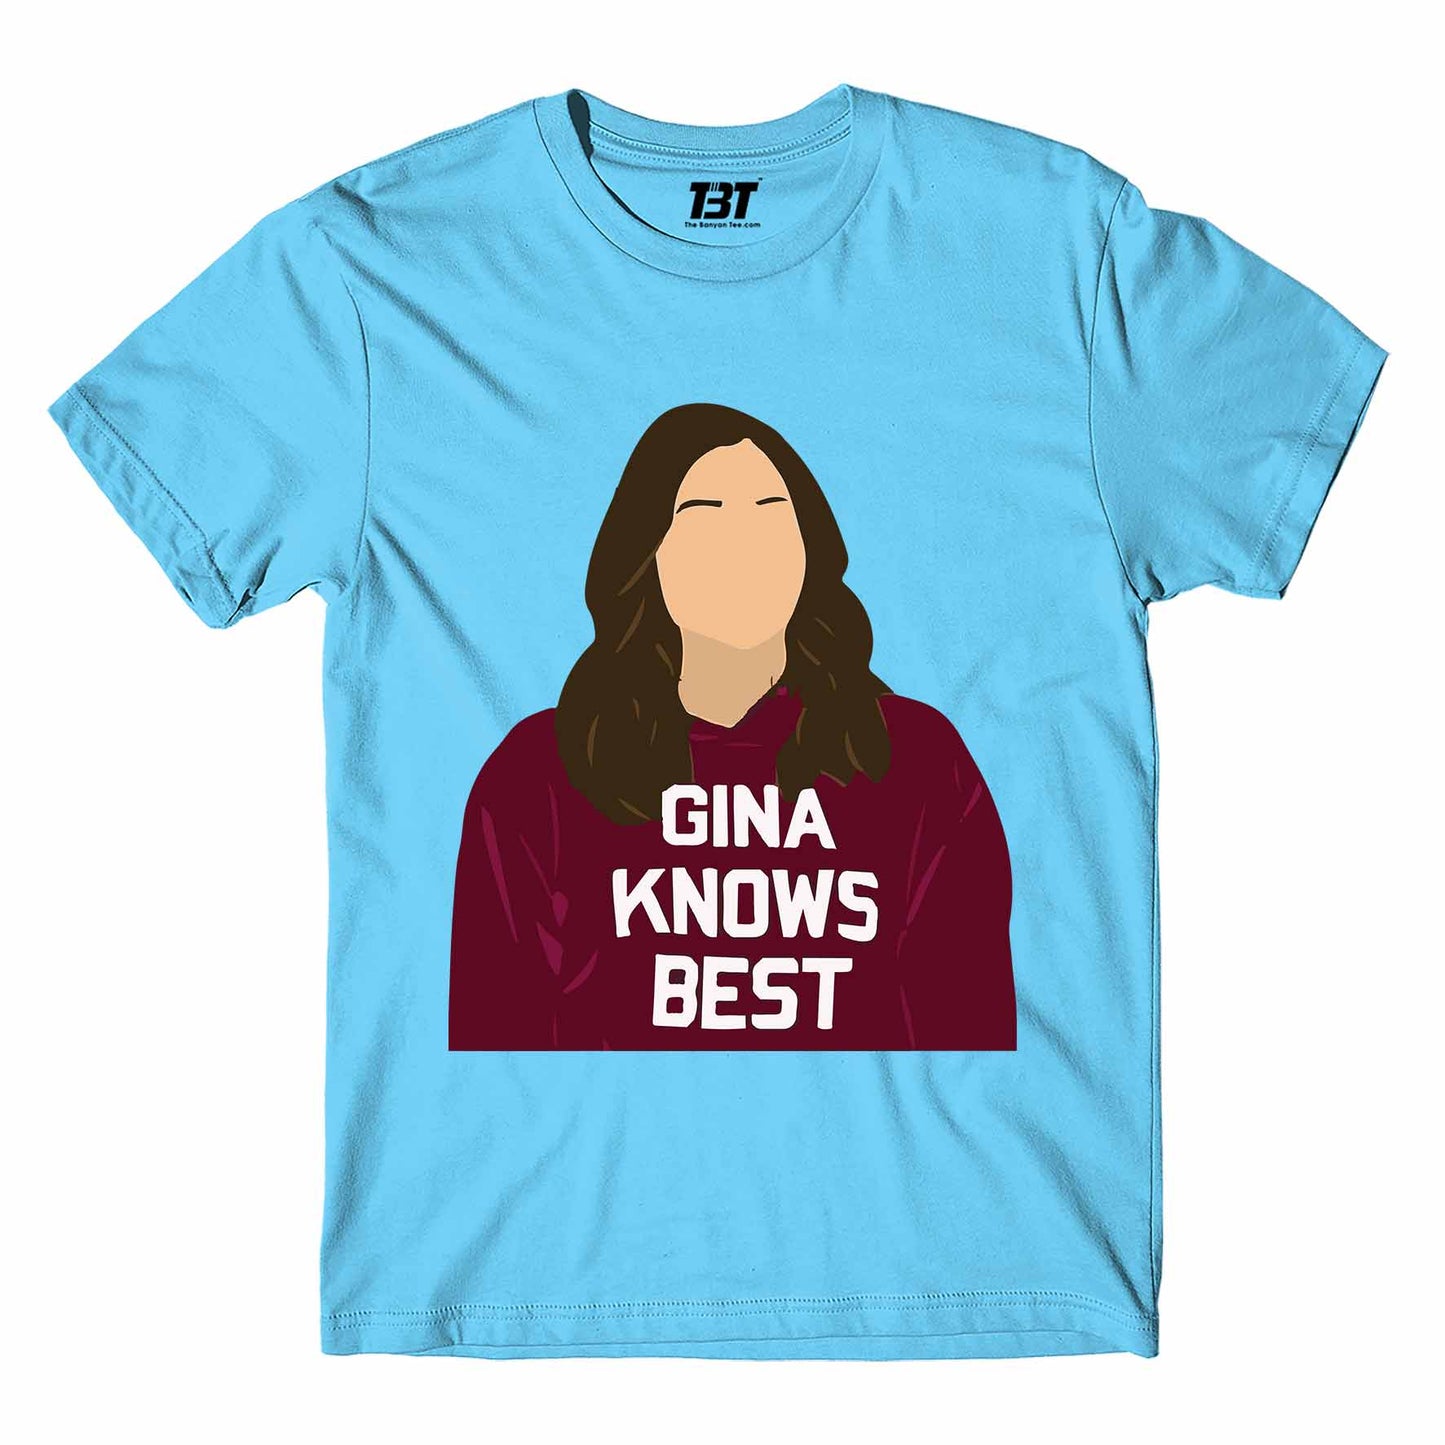 brooklyn nine-nine gina knows best t-shirt buy online india the banyan tee tbt men women girls boys unisex Sky Blue detective jake peralta terry charles boyle gina linetti andy samberg merchandise clothing acceessories